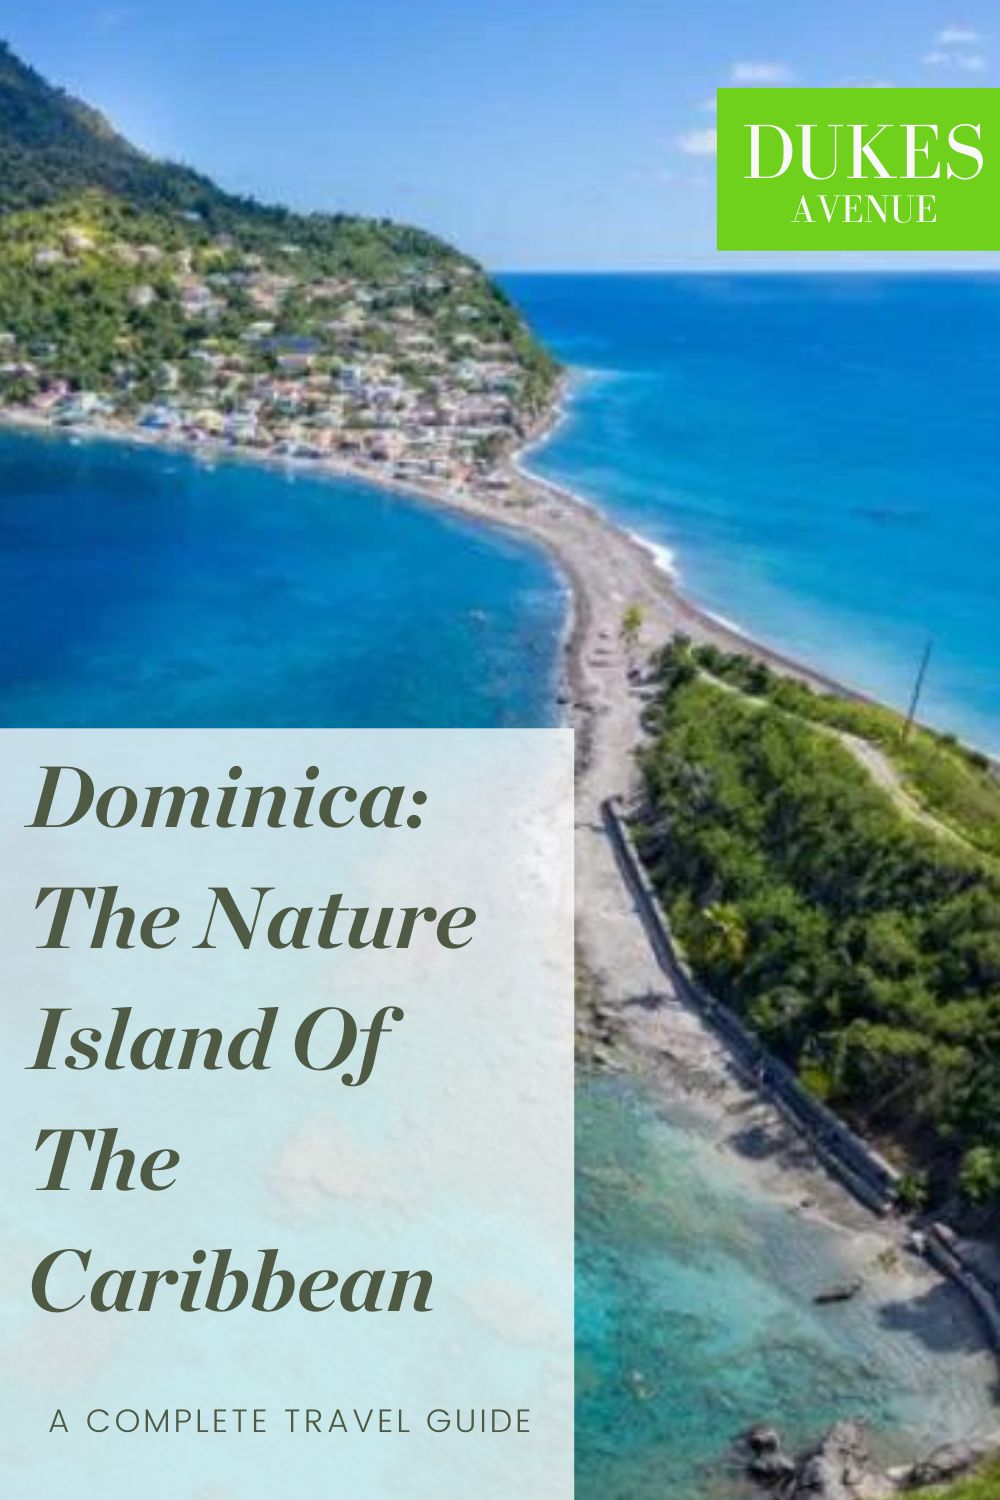 Image of the island of Dominica with text overlay 'Dominica - The Nature Island of the Caribbean'